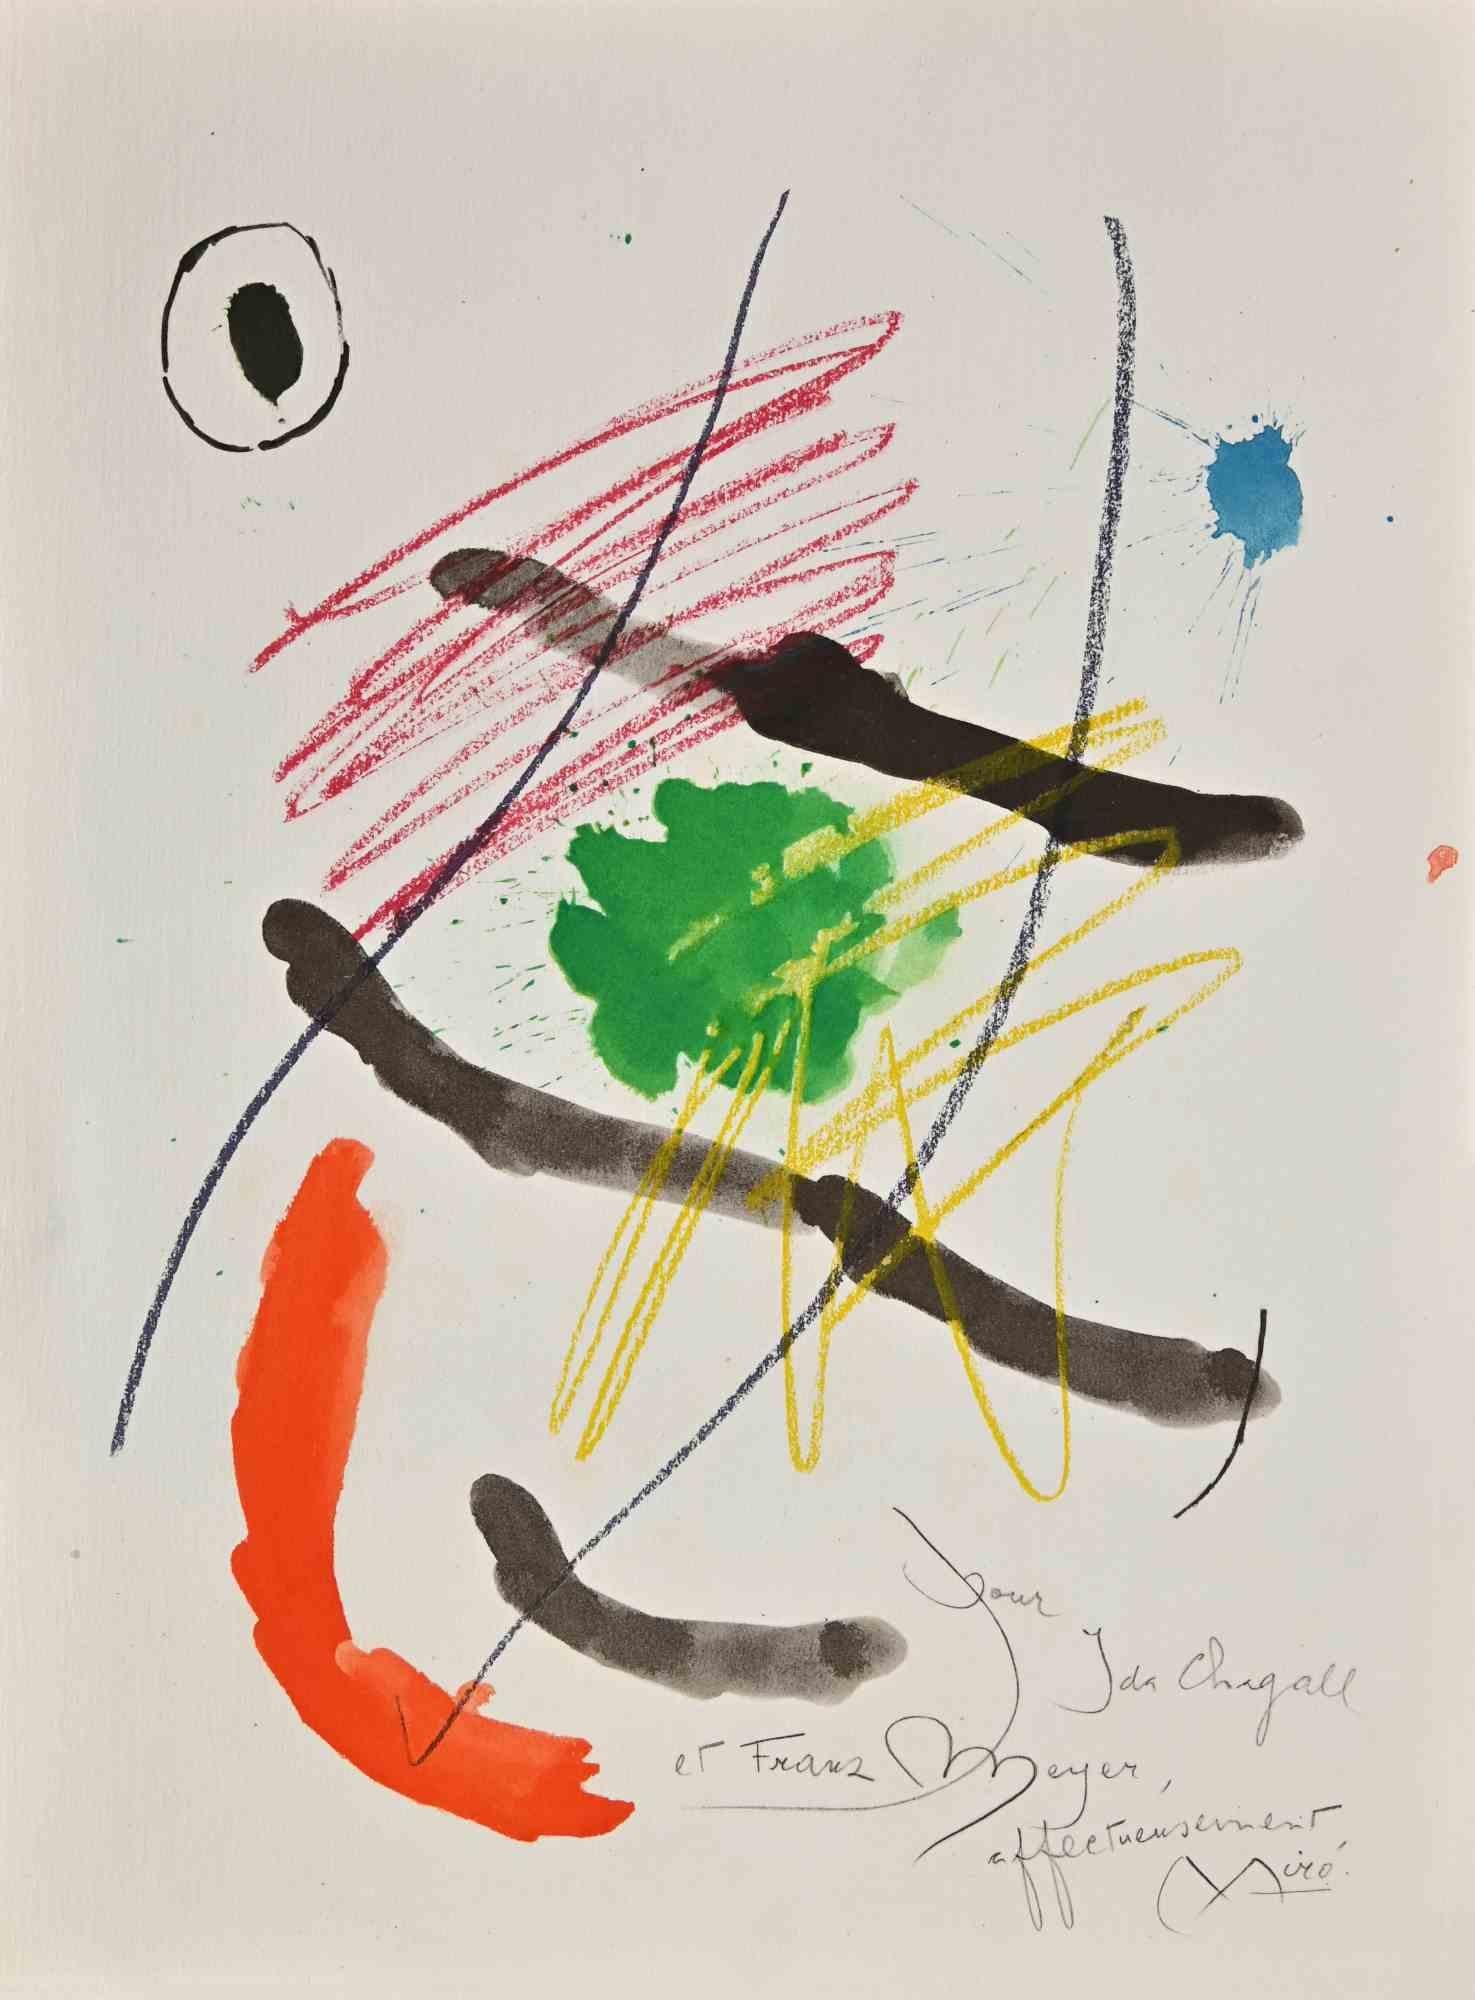 Pour Ida Chagall et Franz Meyer - Lithograph by Joan Mirò - 1970s